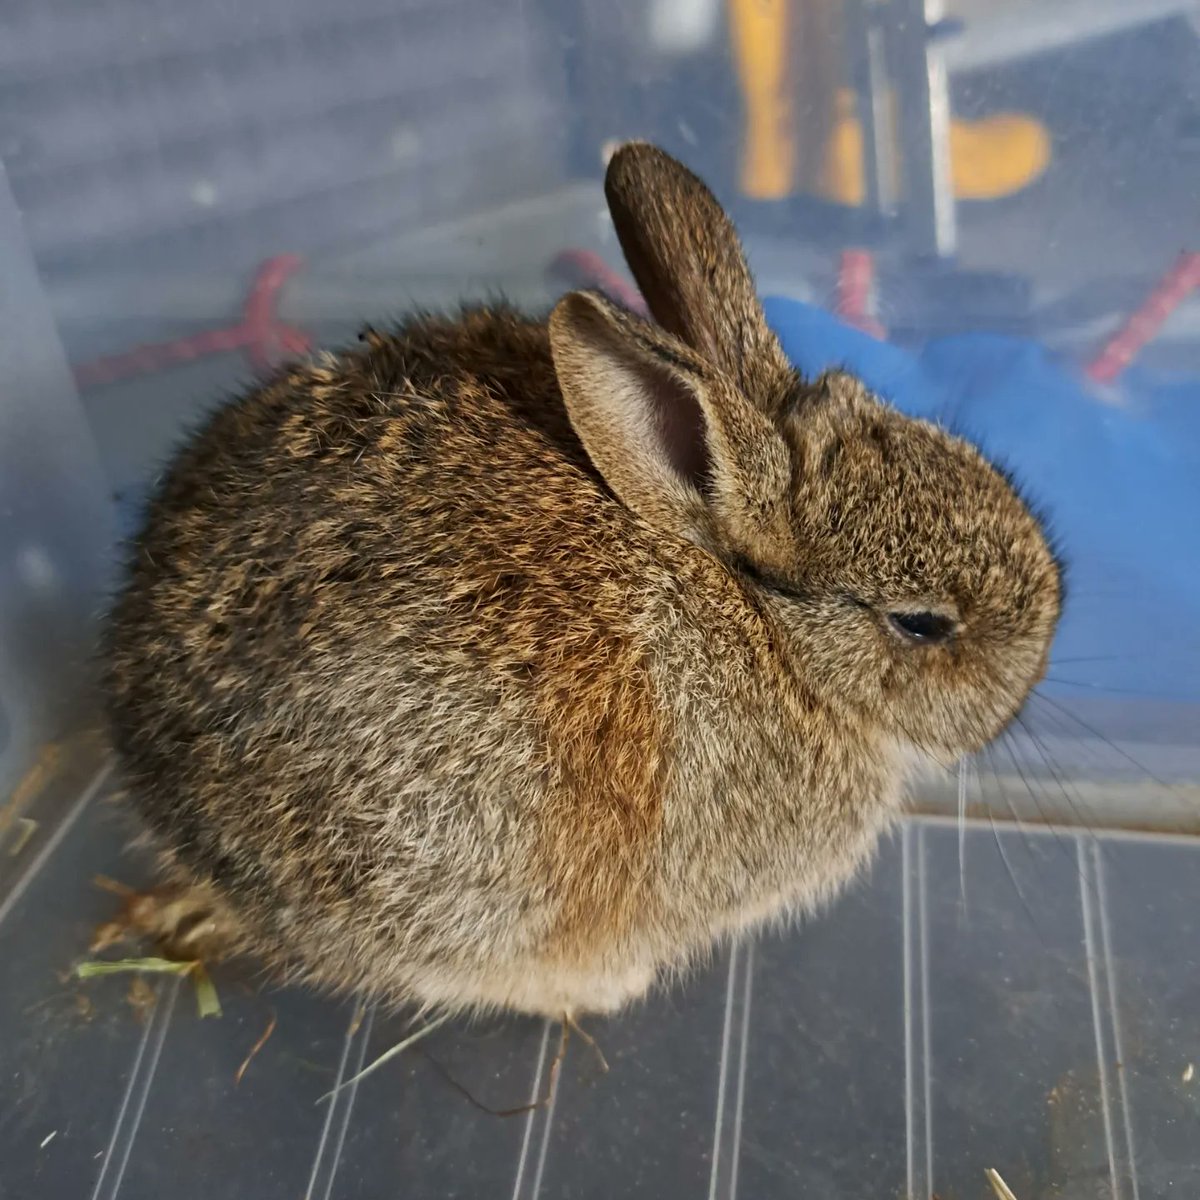 Bunny rescue, a young injured bunny. He was hiding on the inside wheel of a car, I managed to extricate him from the wheel. Have popped him in a box and put him in the garage where it's quiet and dark till the SSPCA come and collect him. #wildrabbit #rabbit #rescue #bunny